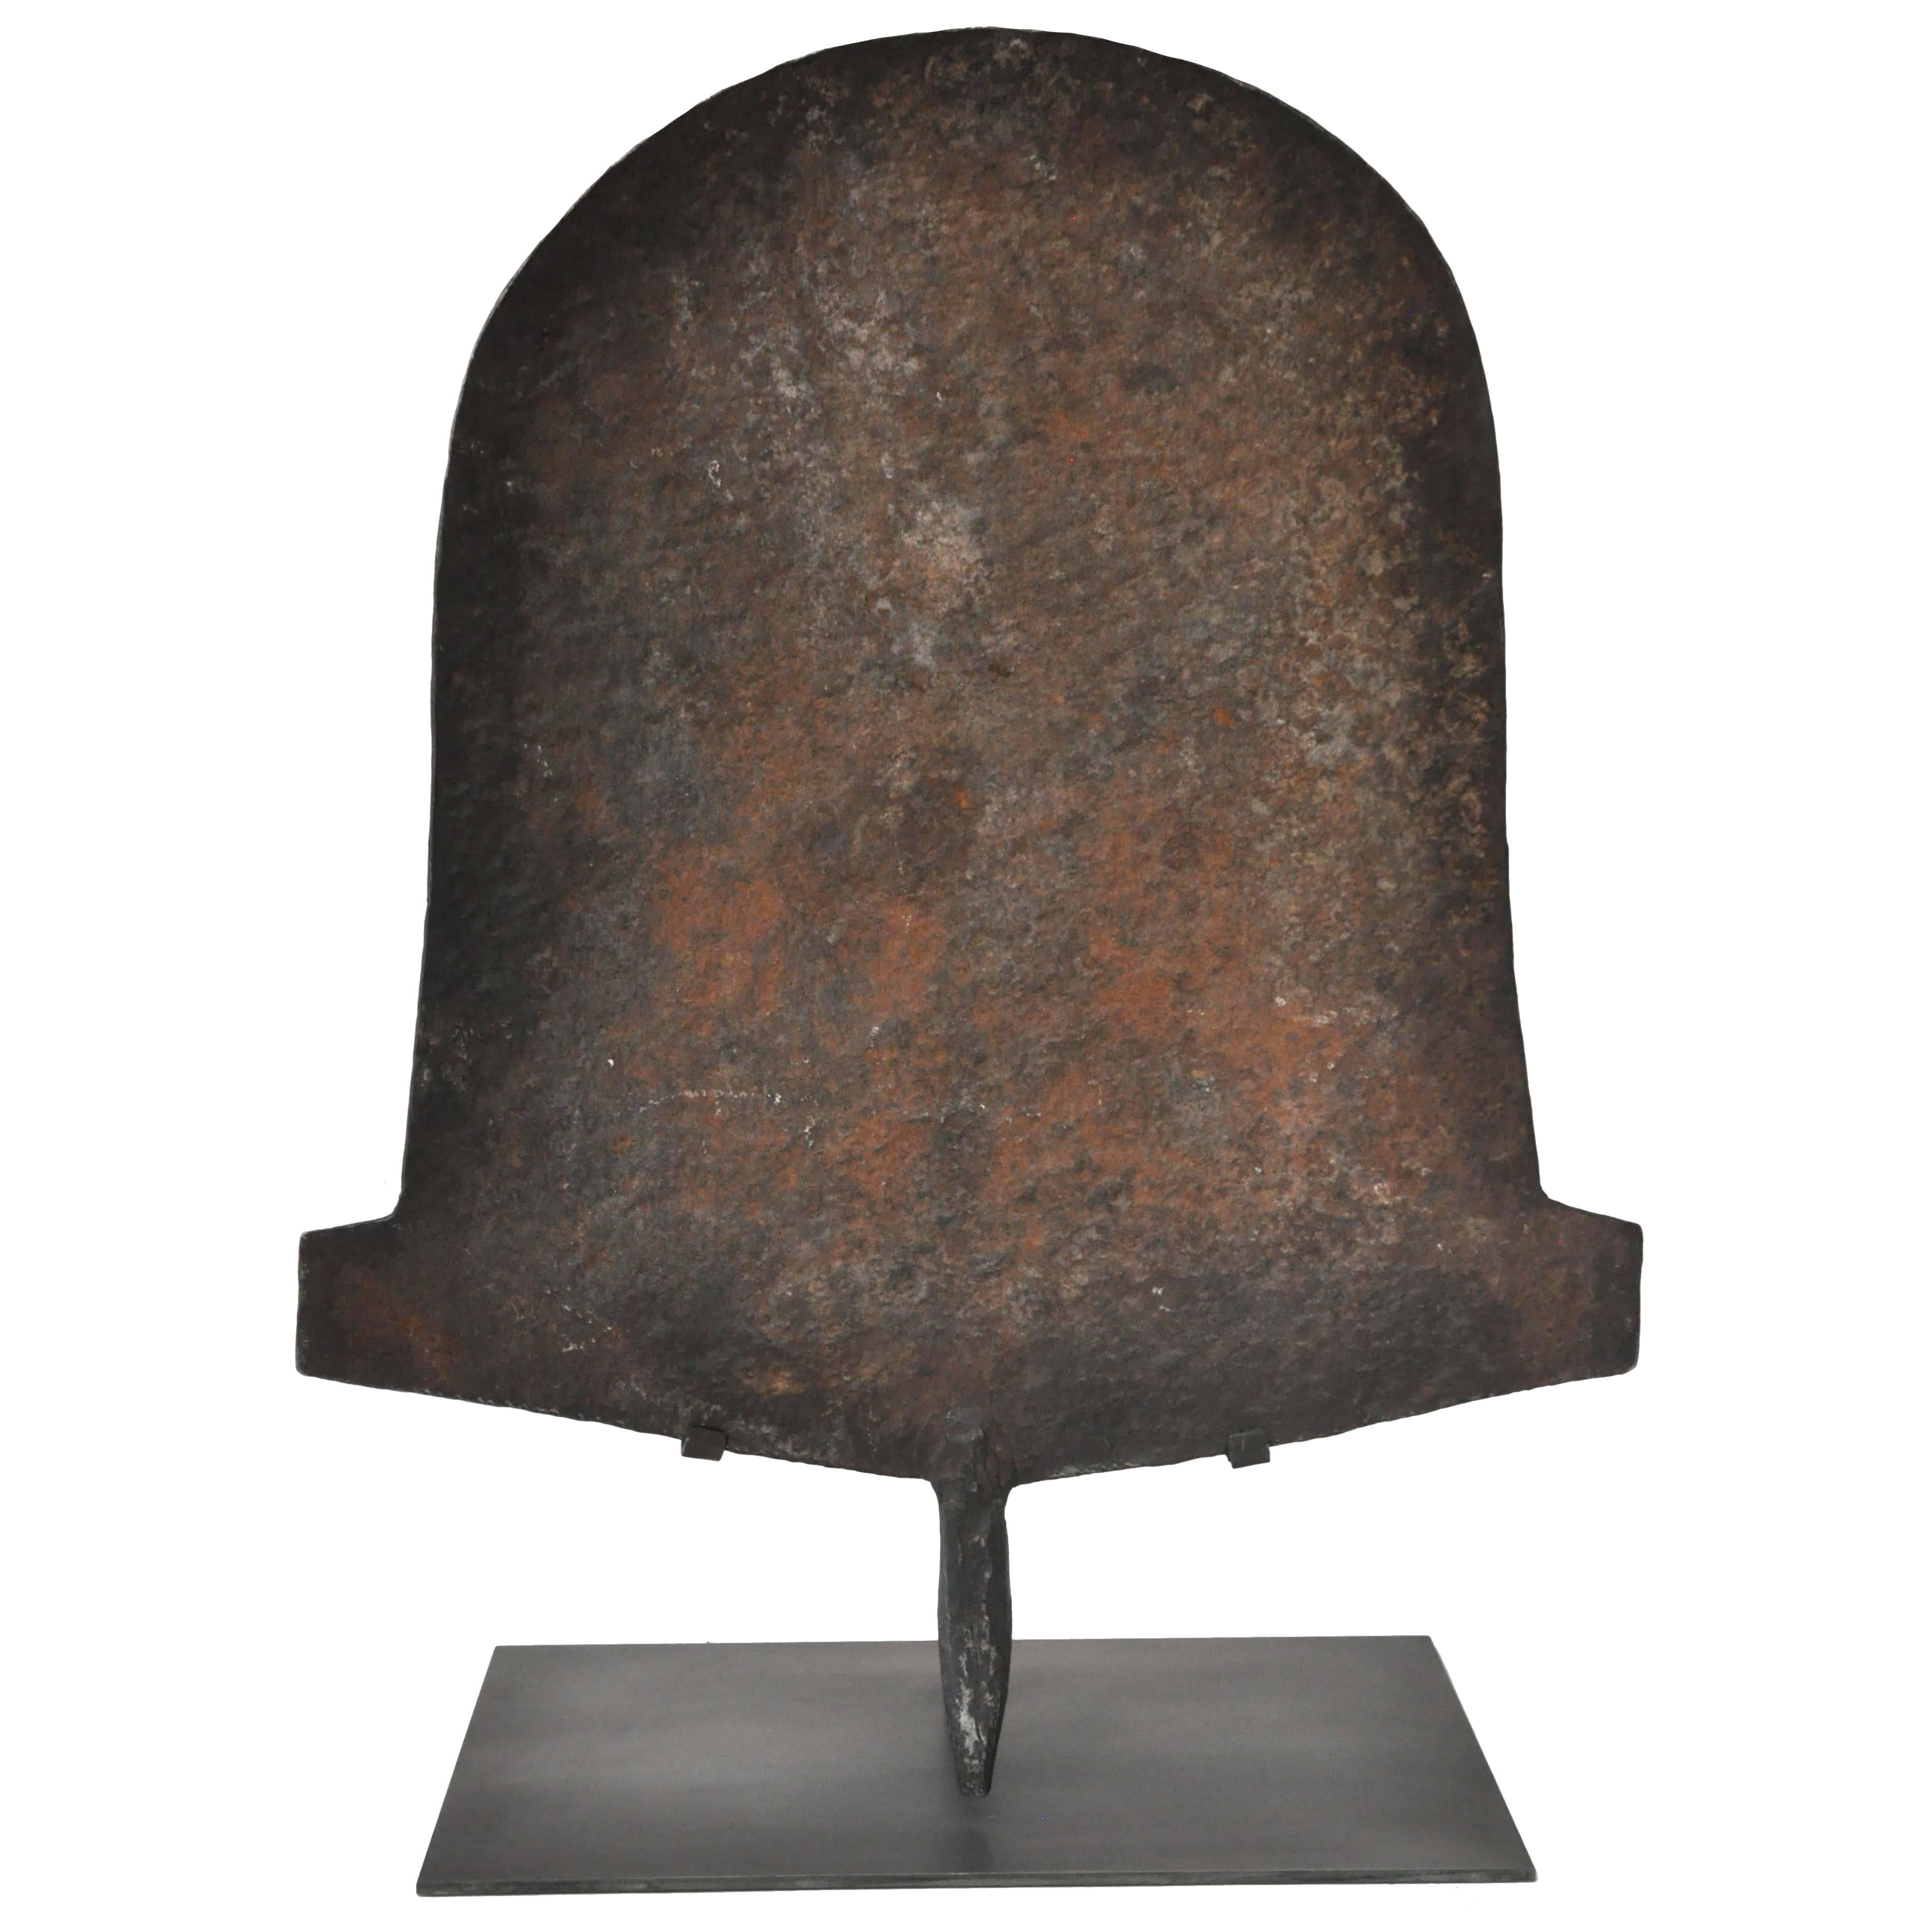  Early 19th Century Nigerian Iron Shield/Currency